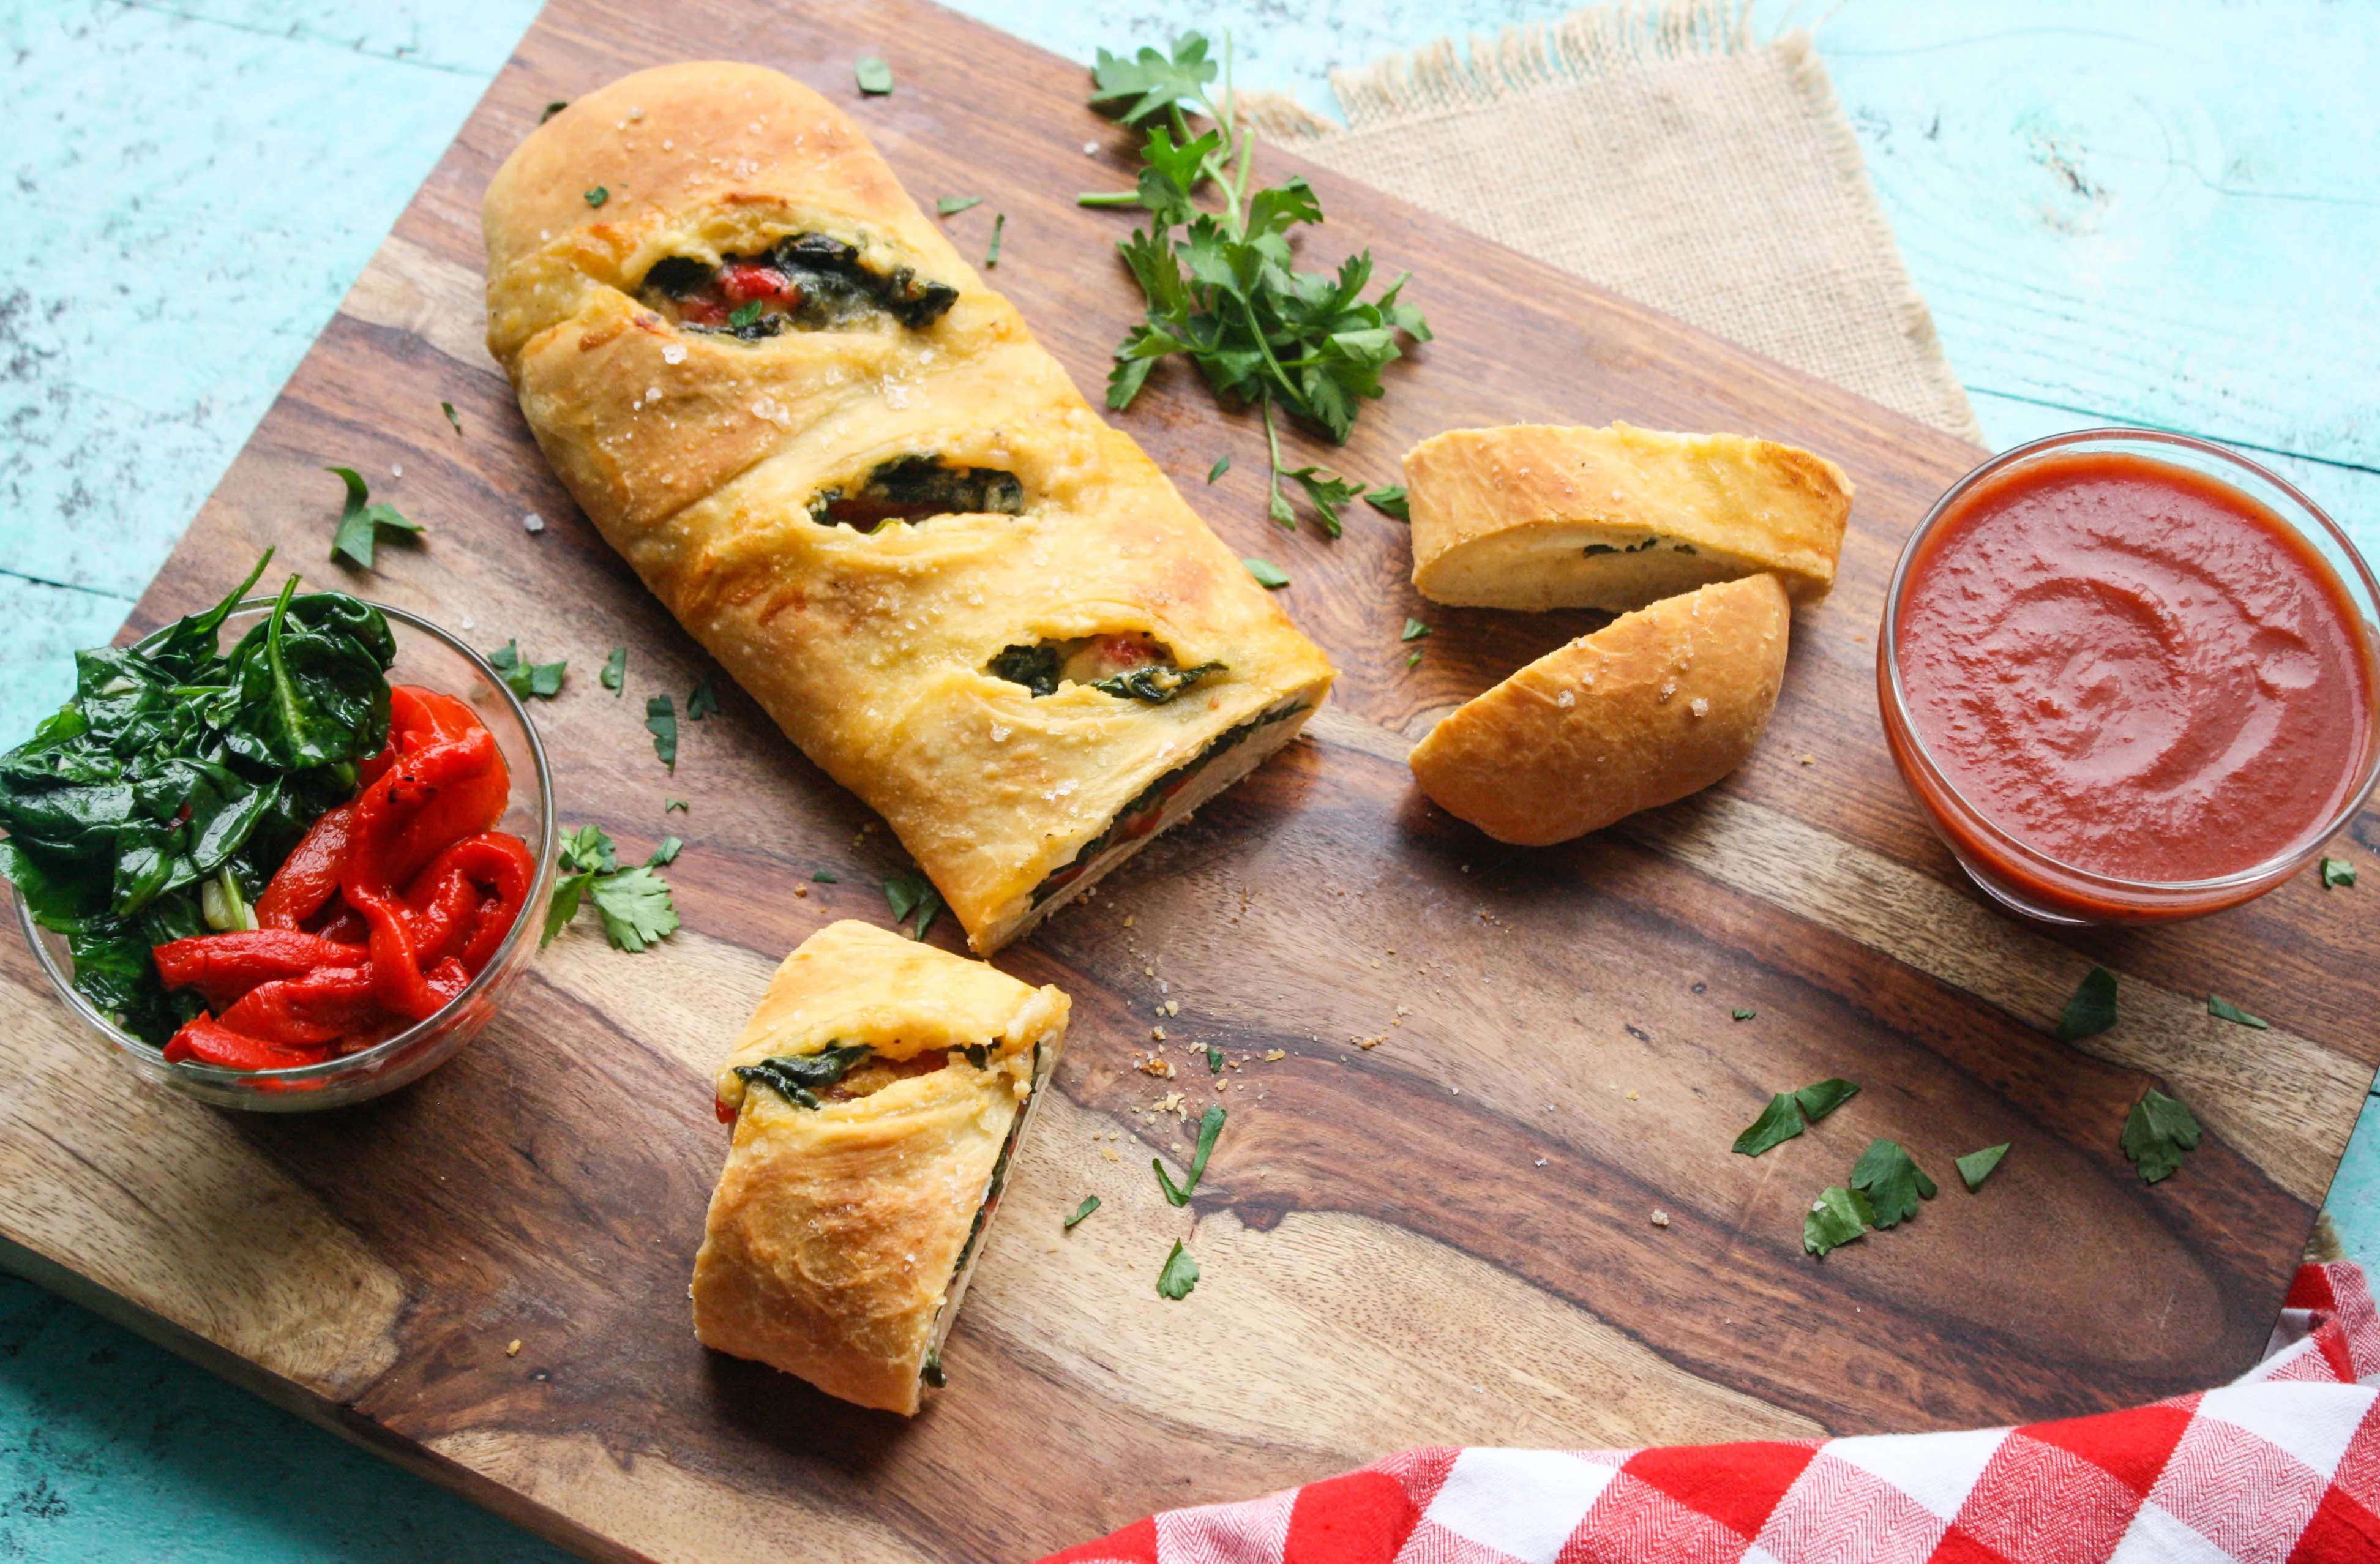 Spinach and Roasted Red Pepper Stromboli is filled with delicious ingredients and it's so fun to serve! You'll love this pizza-like dish.